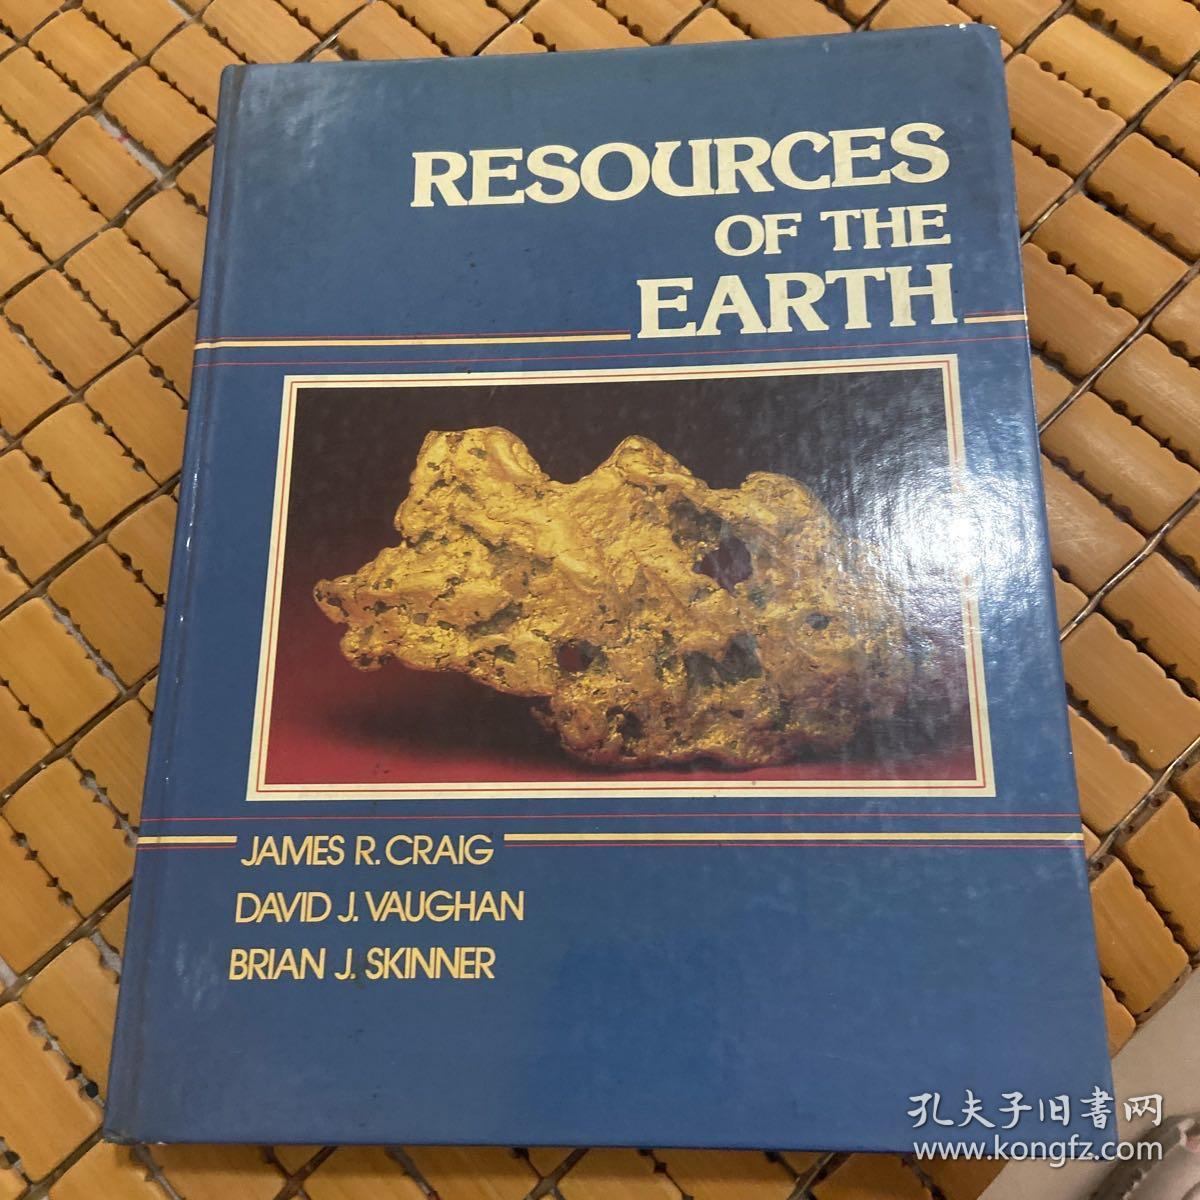 RESOURCES OF THE EARTH